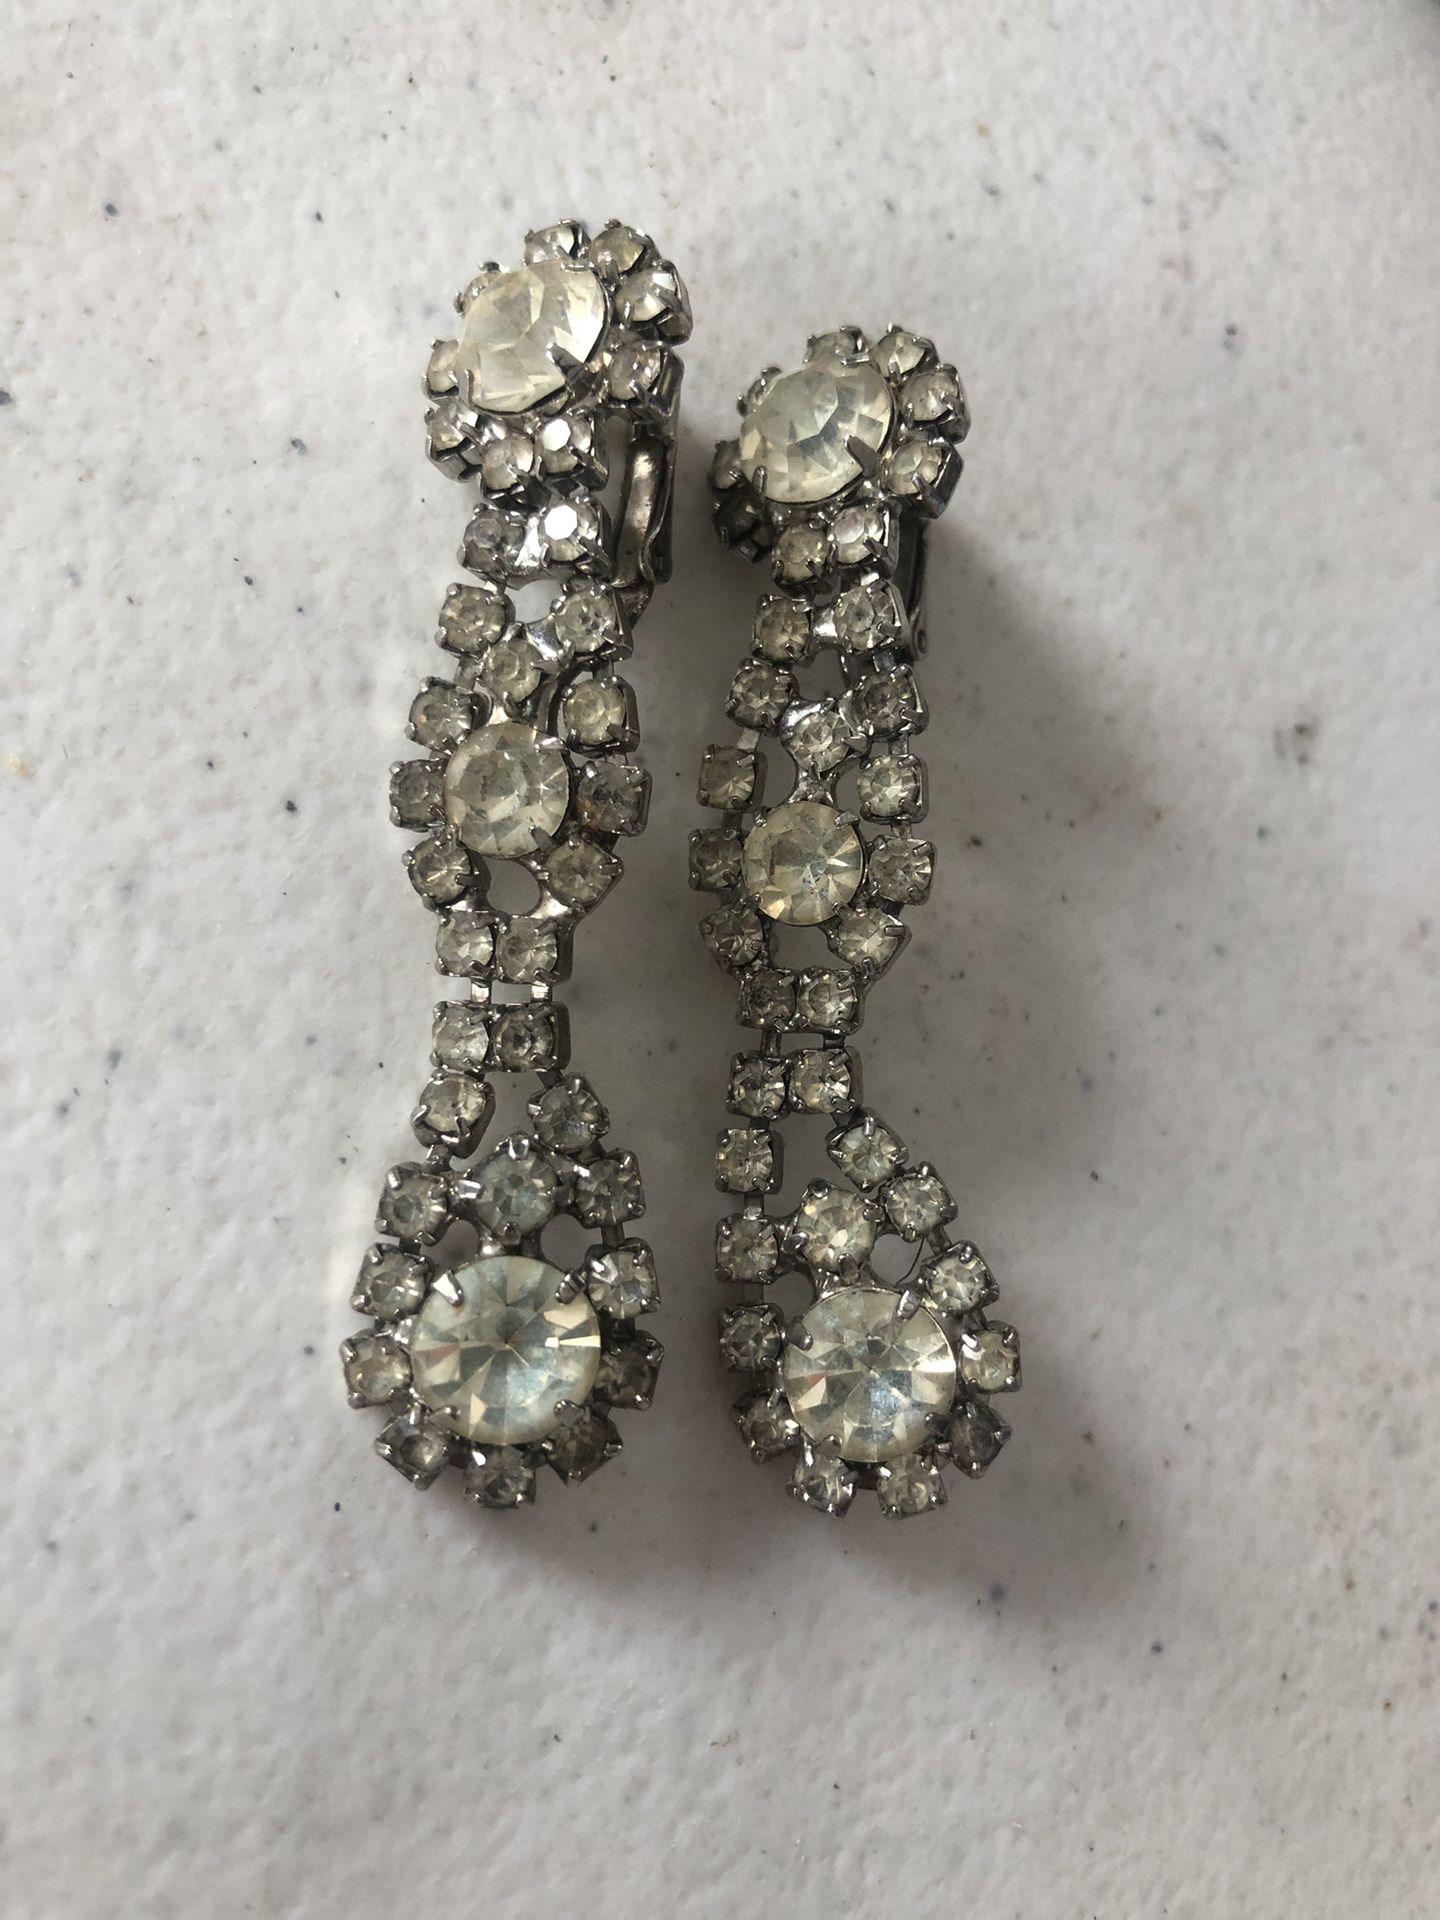 Rhinestone Brooch Earrings And Necklace 